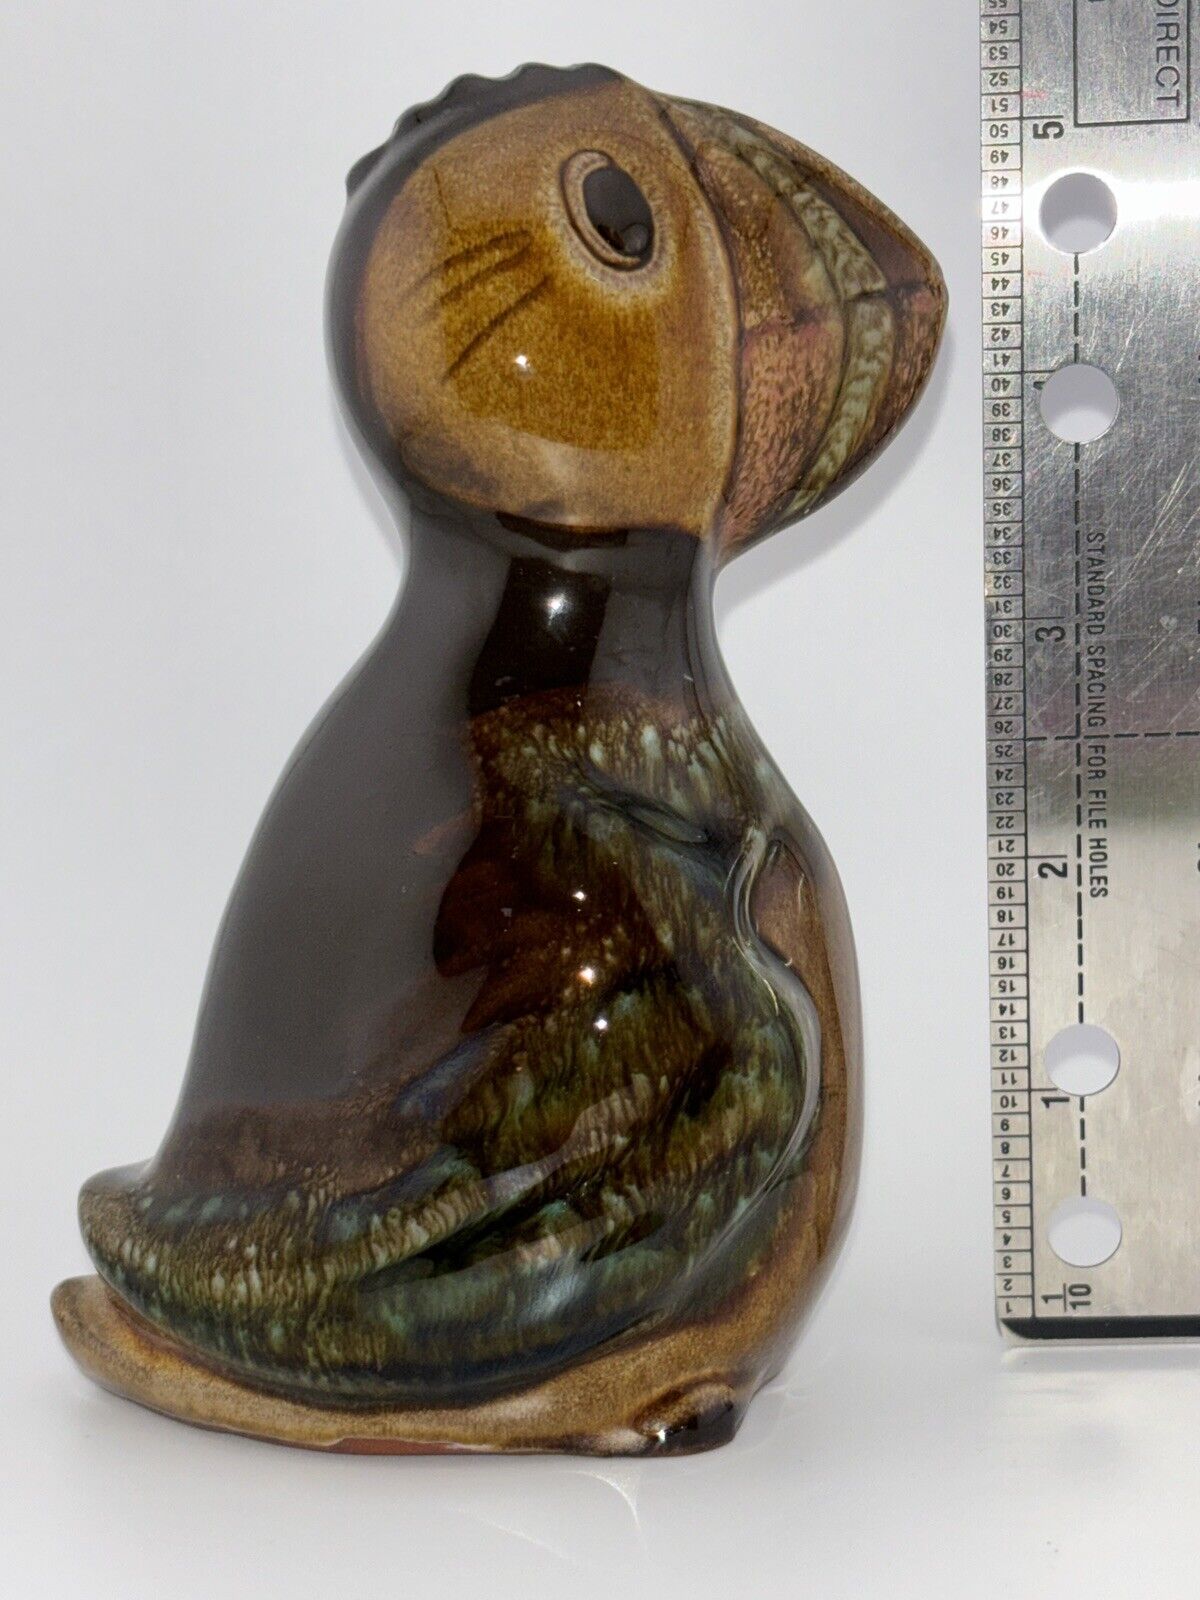 Vintage GUERNSEY POTTERY Ceramic Hand-Painted PUFFIN Coin/Money Piggy BANK